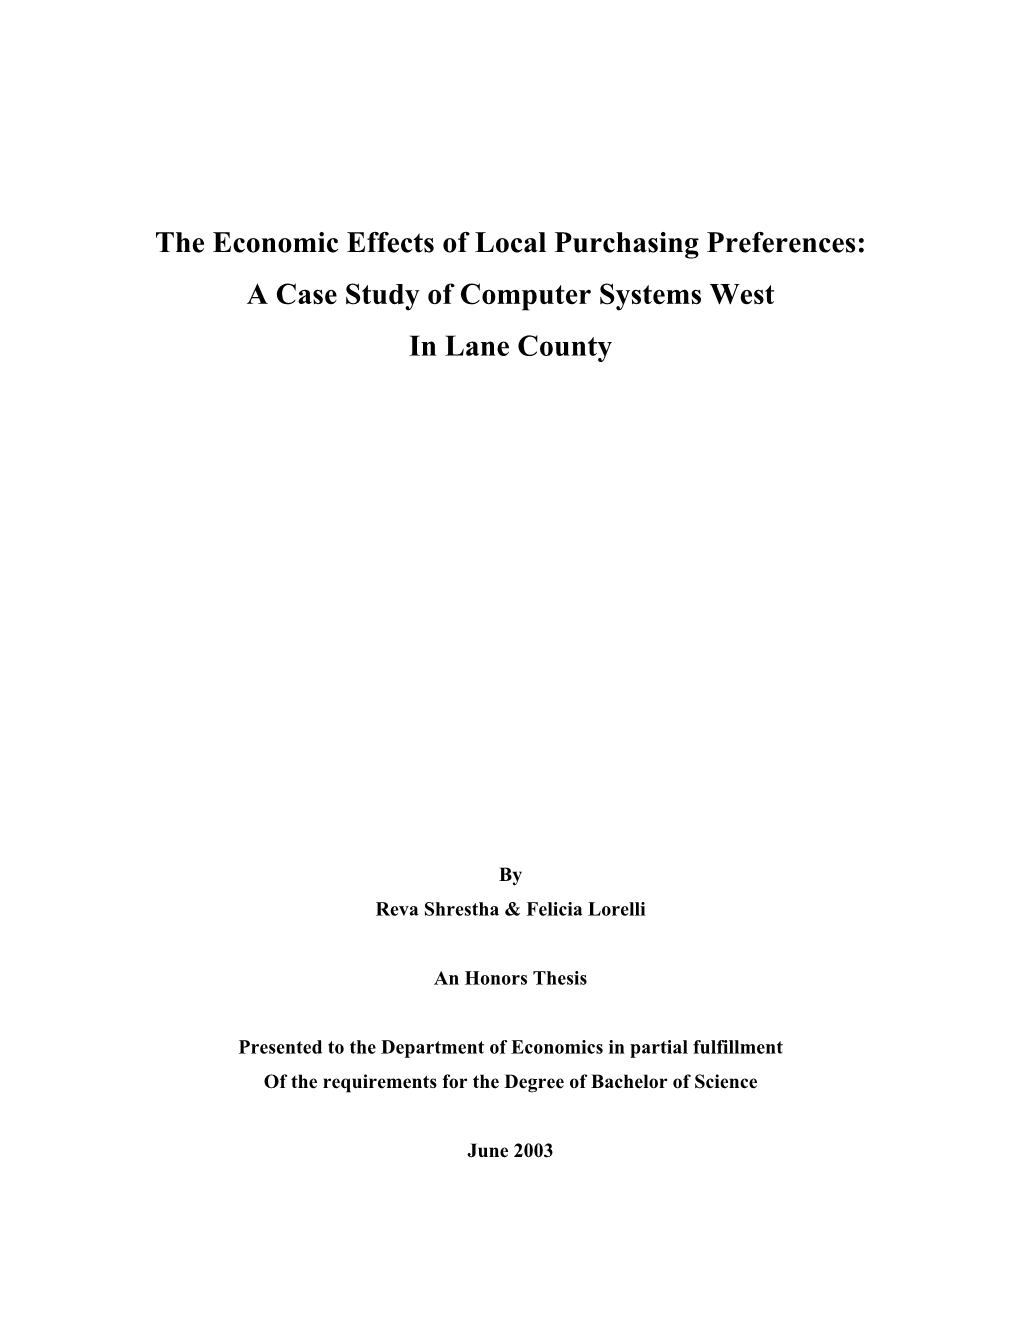 The Economic Effects of Local Purchasing Preferences: a Case Study of Computer Systems West in Lane County